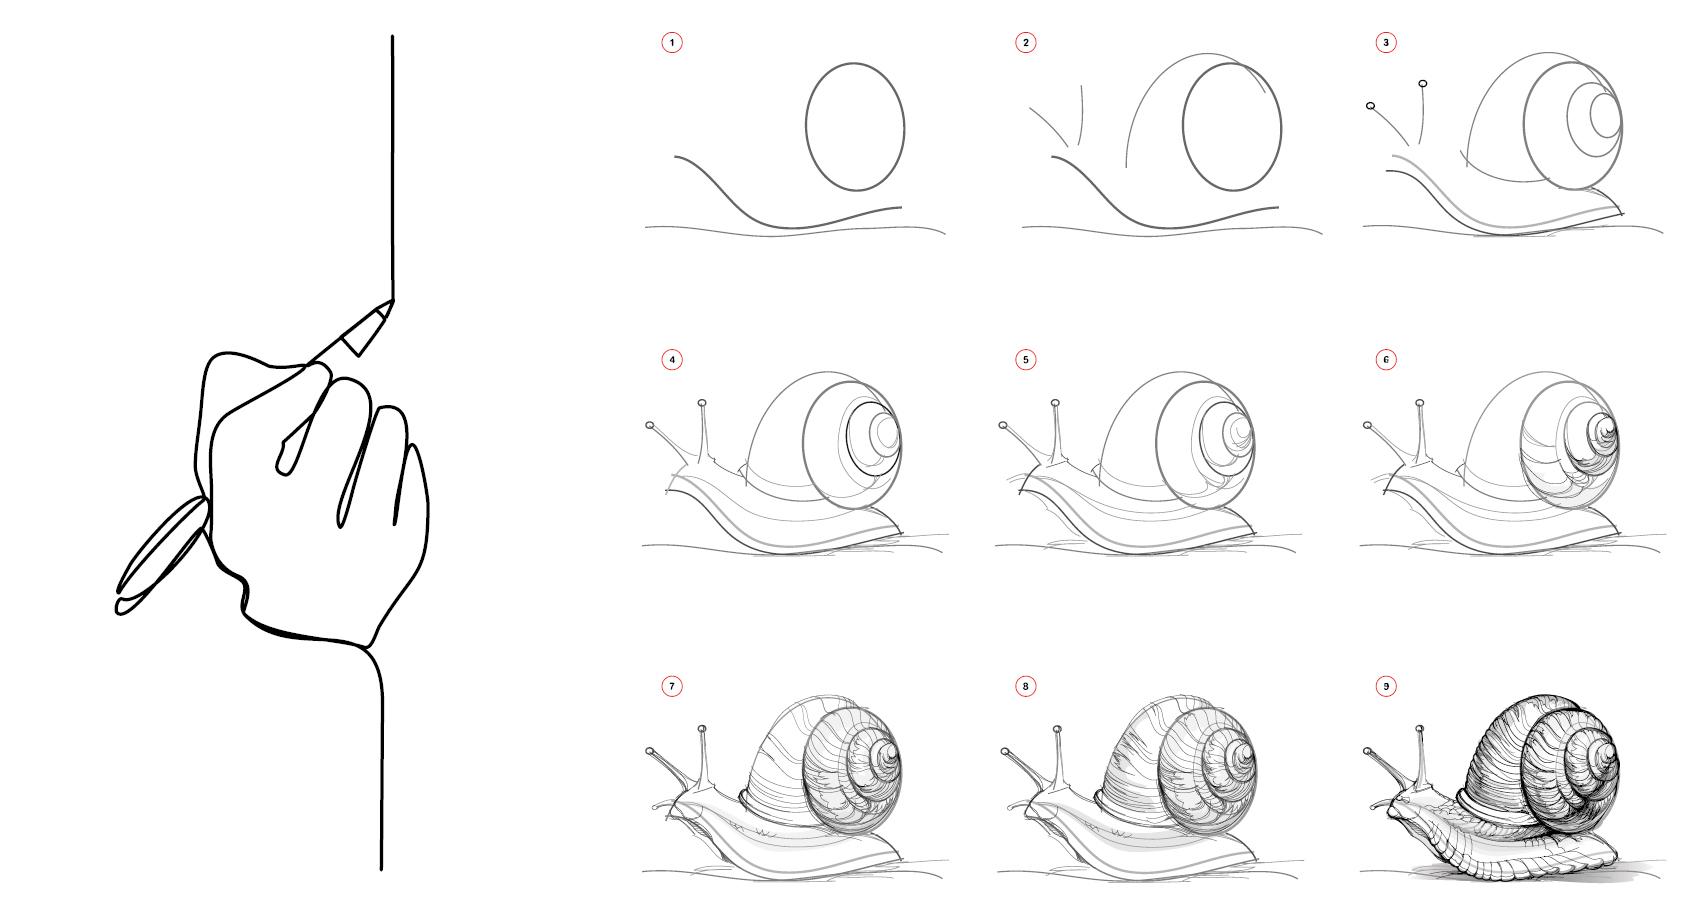 Drawing progression of snails